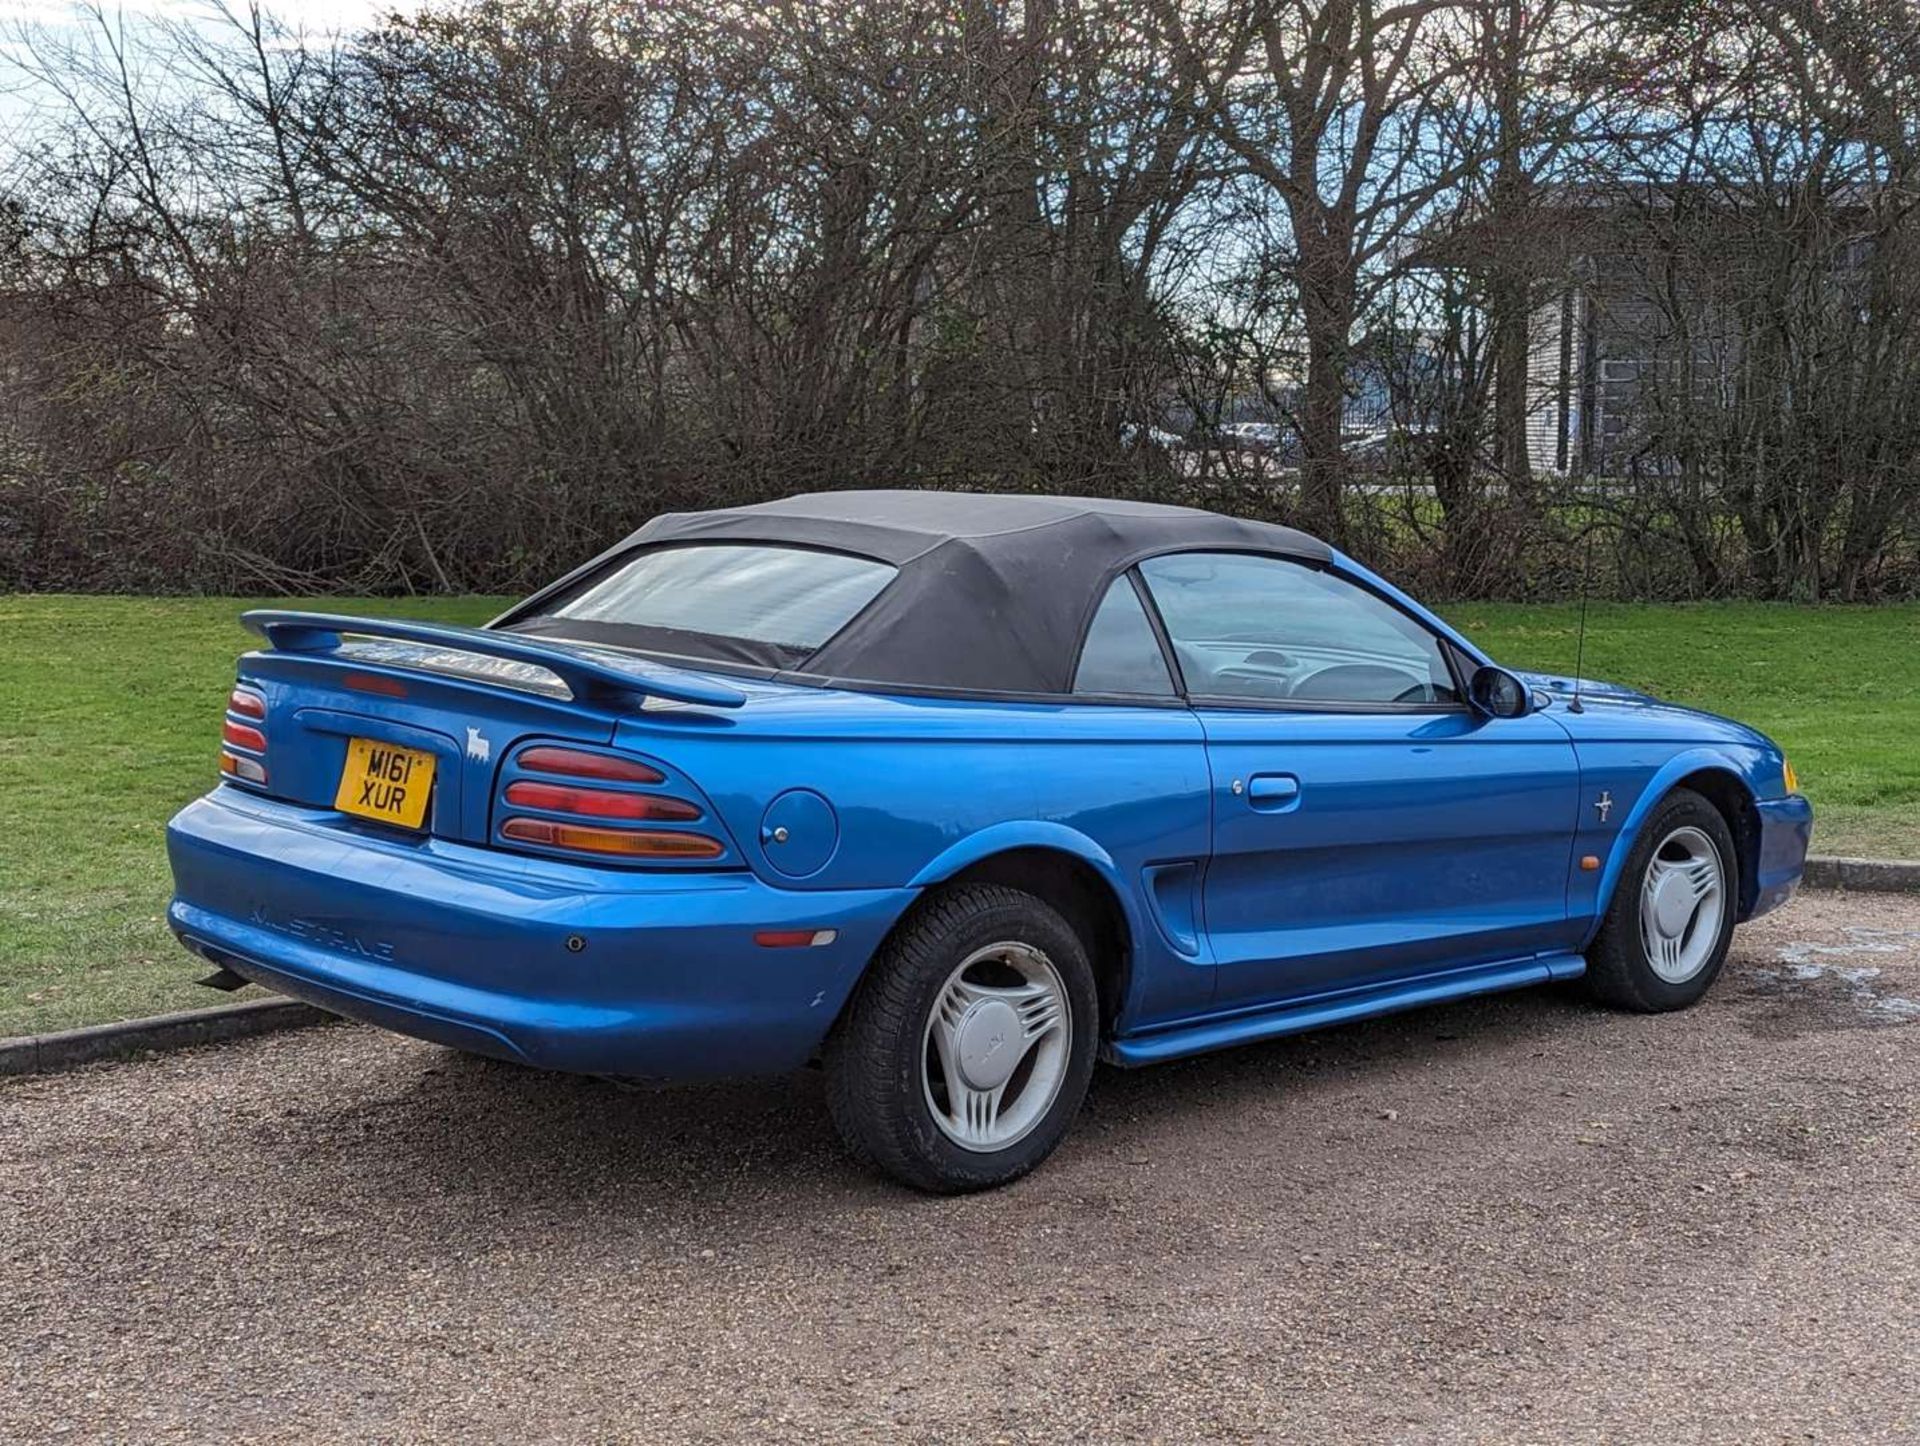 1994 FORD MUSTANG 3.8 CONVERTIBLE LHD - Image 8 of 29